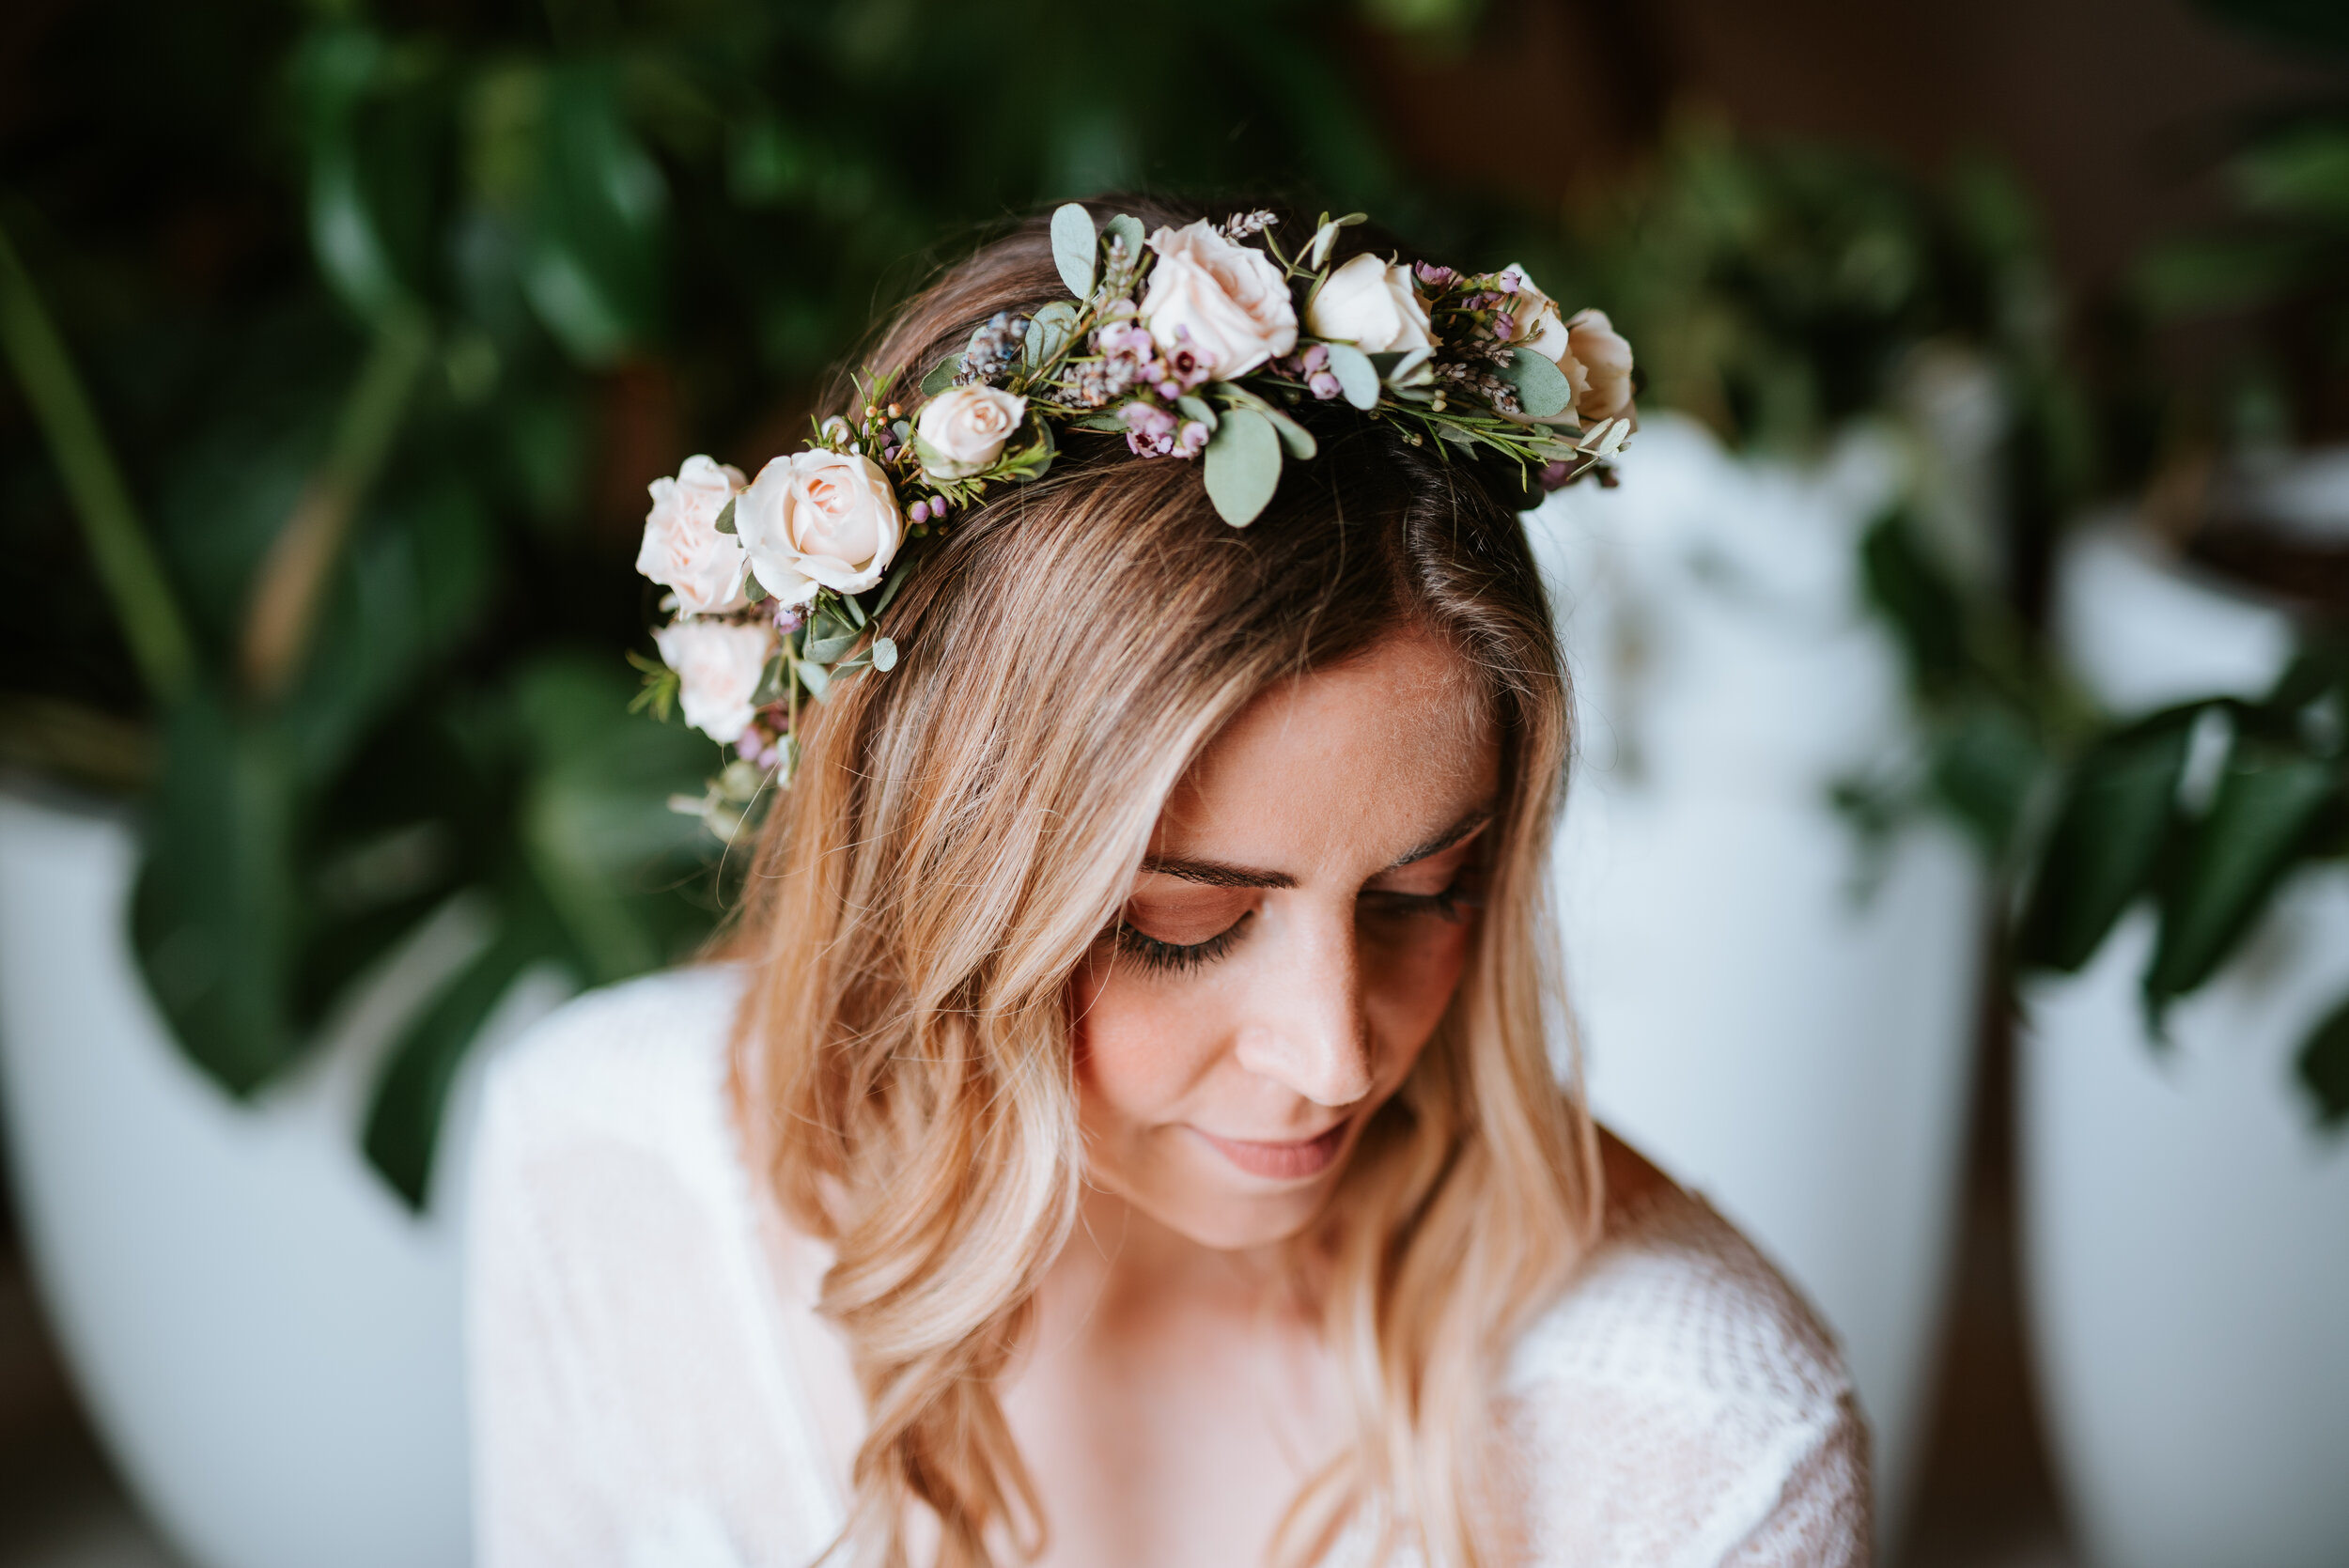 Bride’s flower crown with blush spray roses, wildflowers, eucalyptus, and greenery. Nashville wedding flowers by Rosemary & Finch.